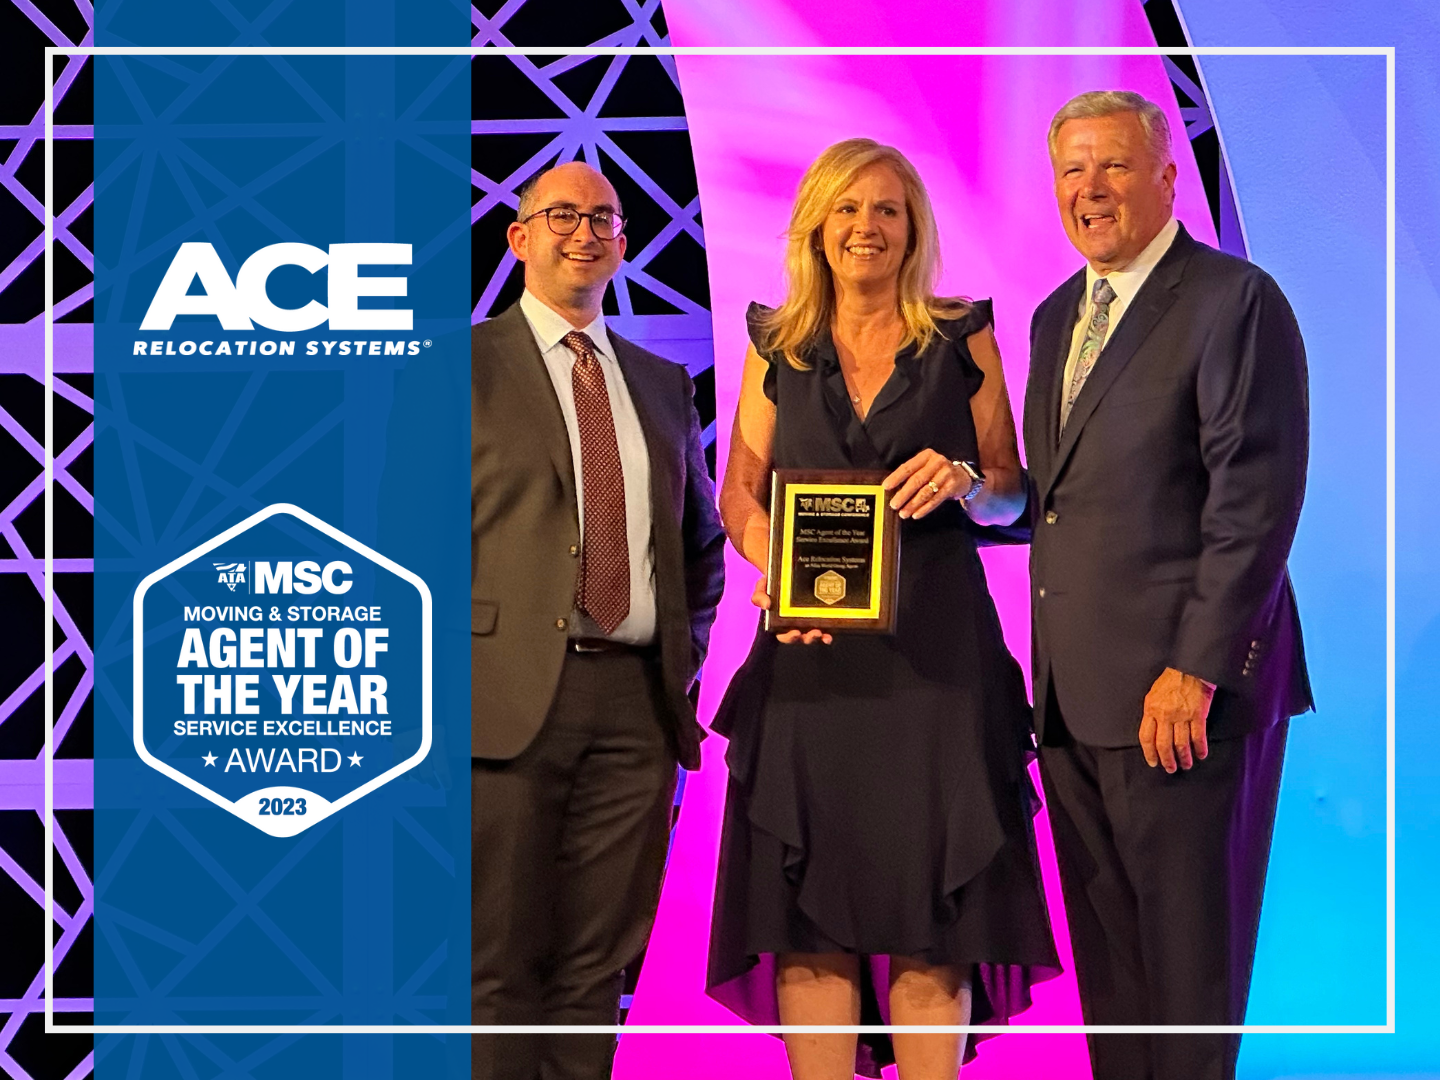 Ace Relocation Systems Receives 2023 MSC Agent of the Year Service Excellence Award